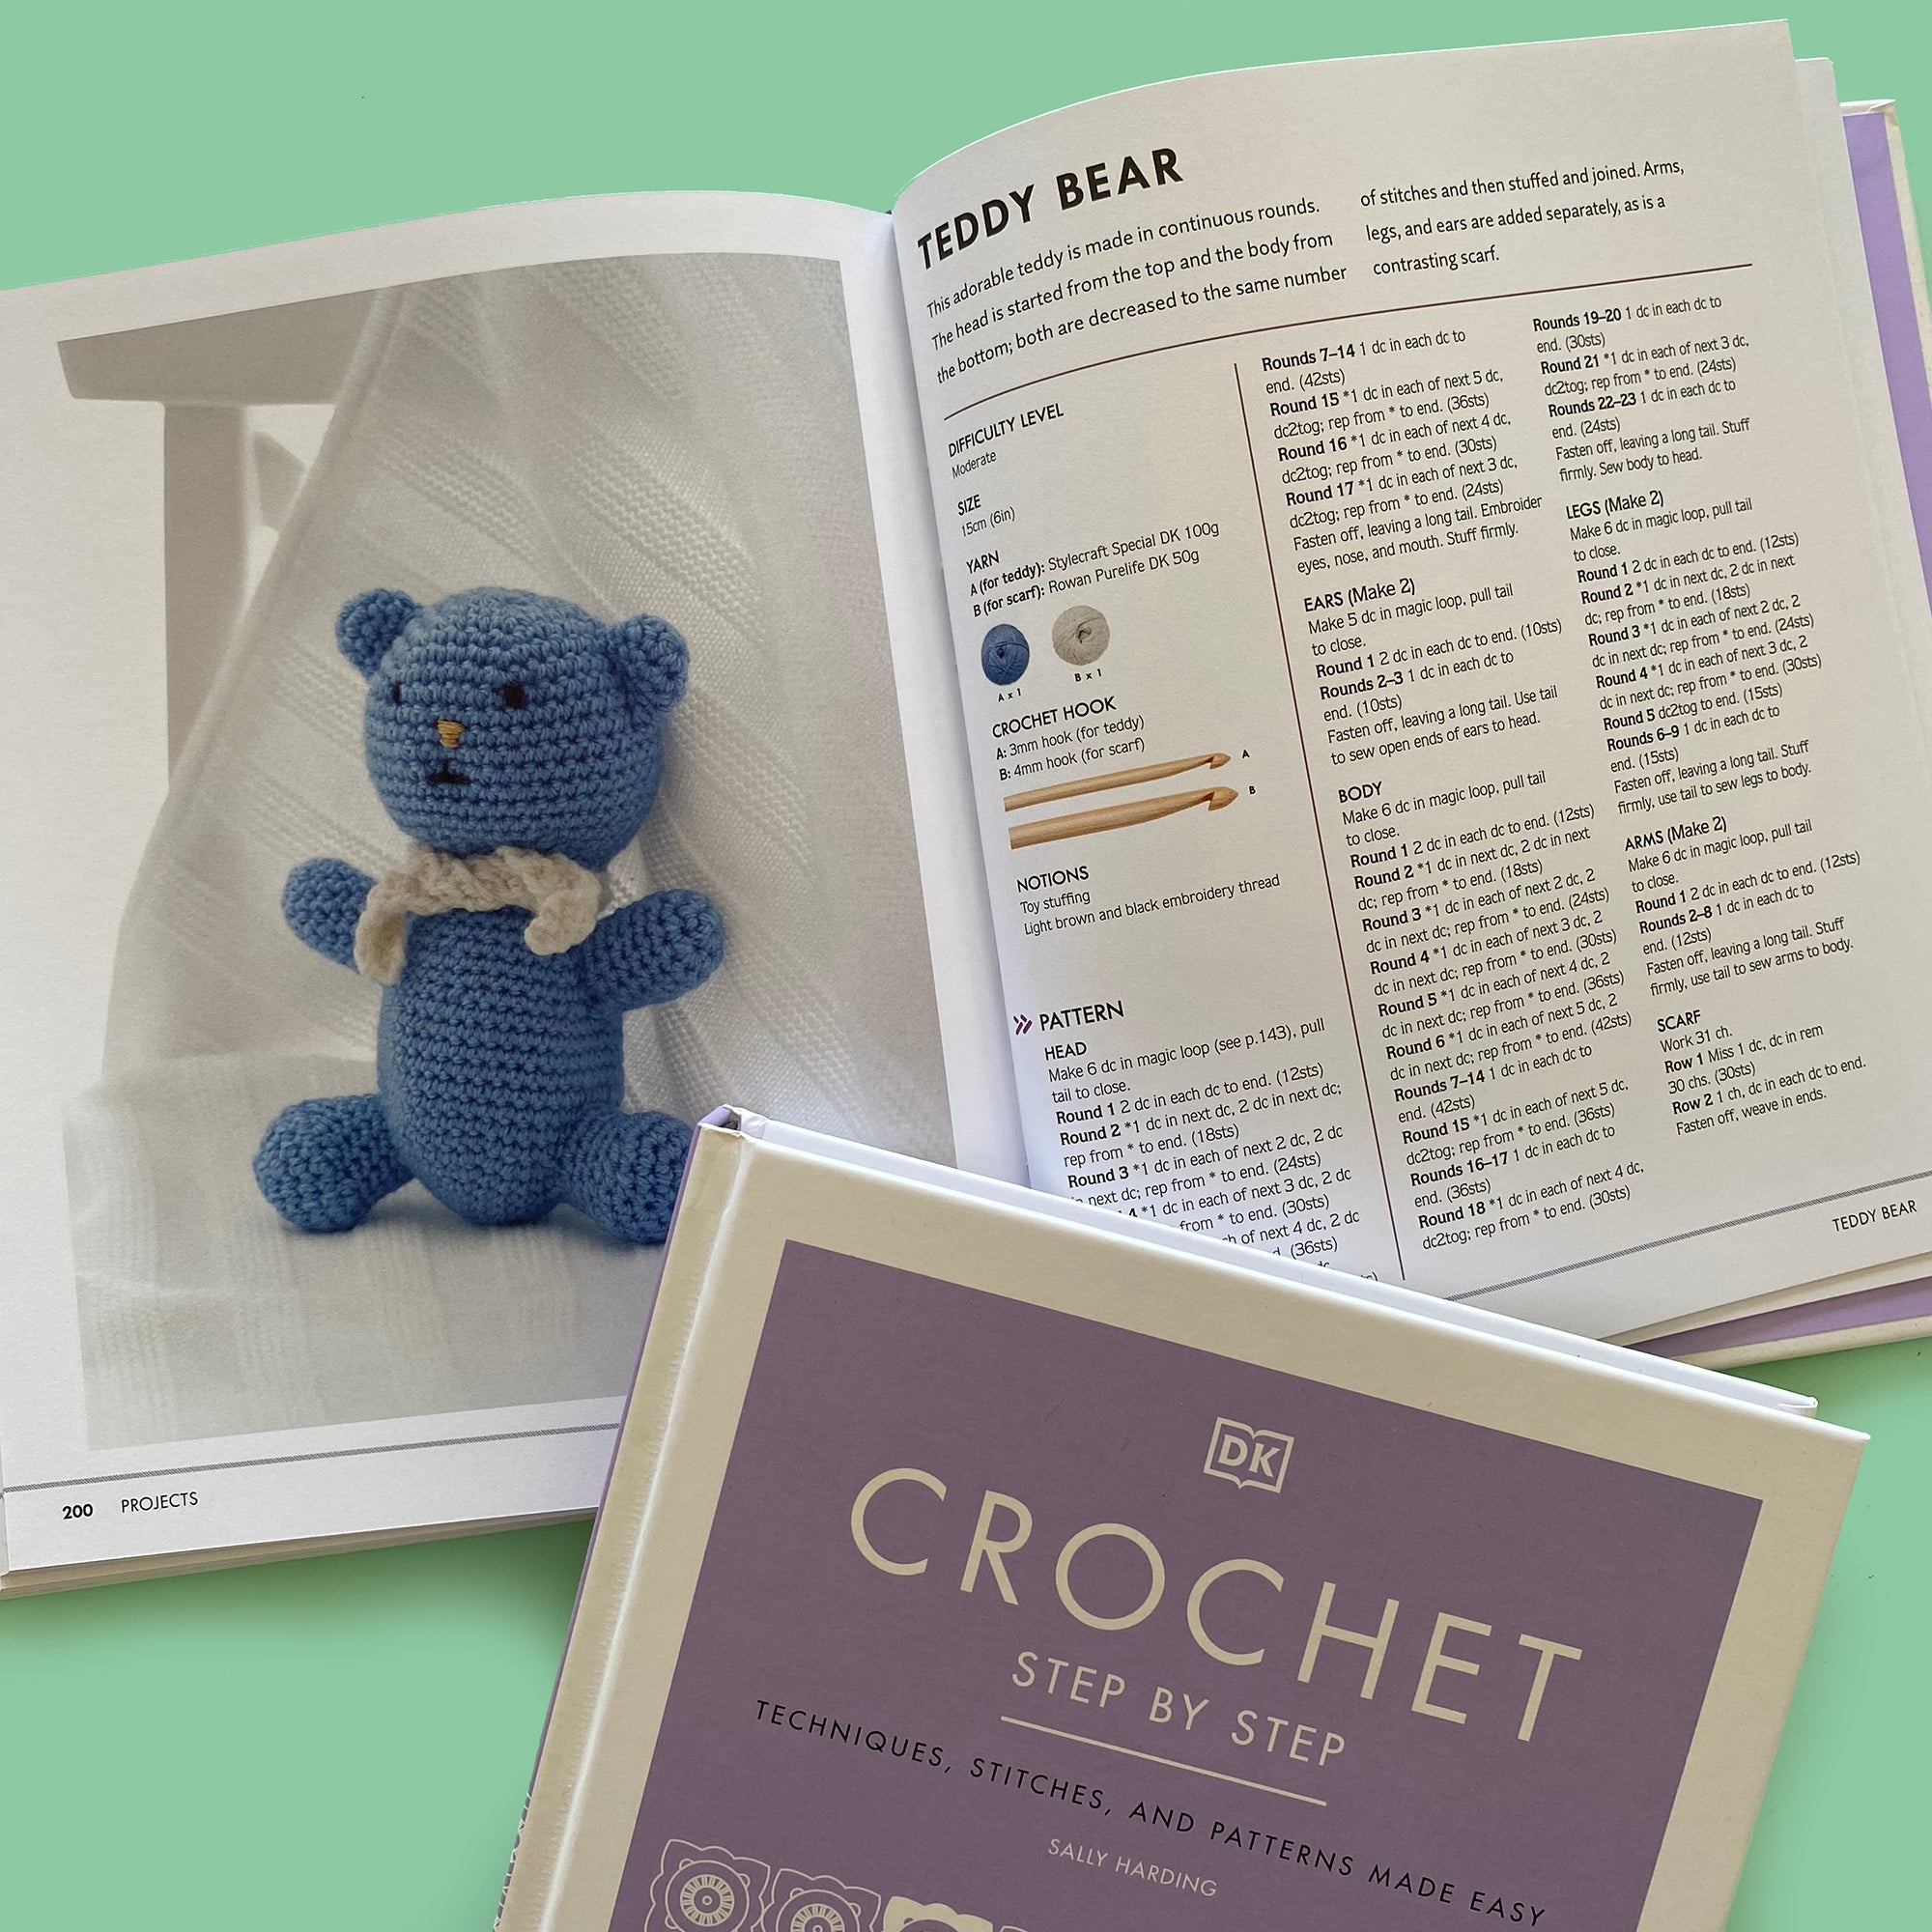 The Step-by-Step Guide to 200 Crochet Stitches [Book]